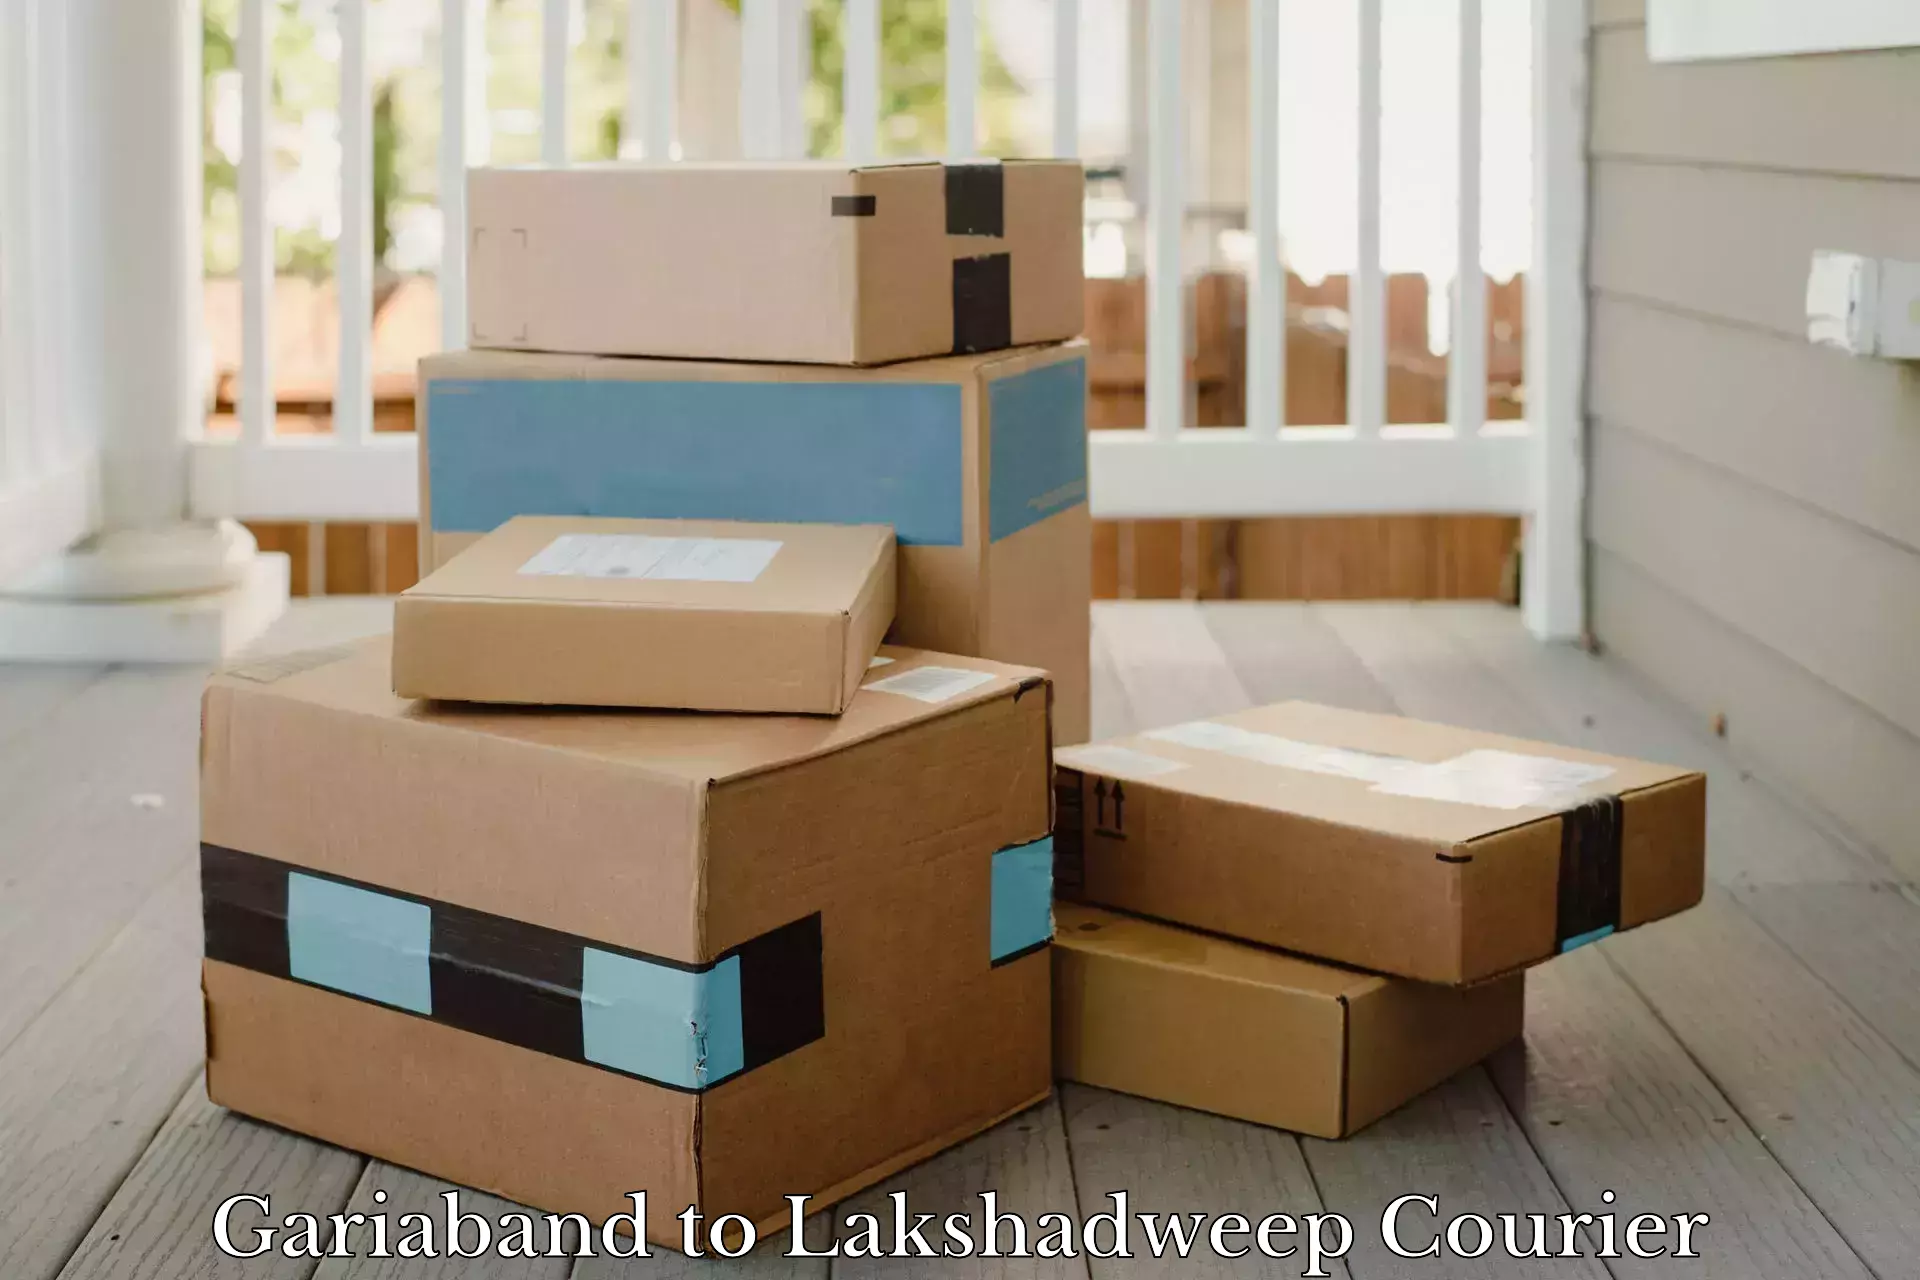 Cargo delivery service Gariaband to Lakshadweep